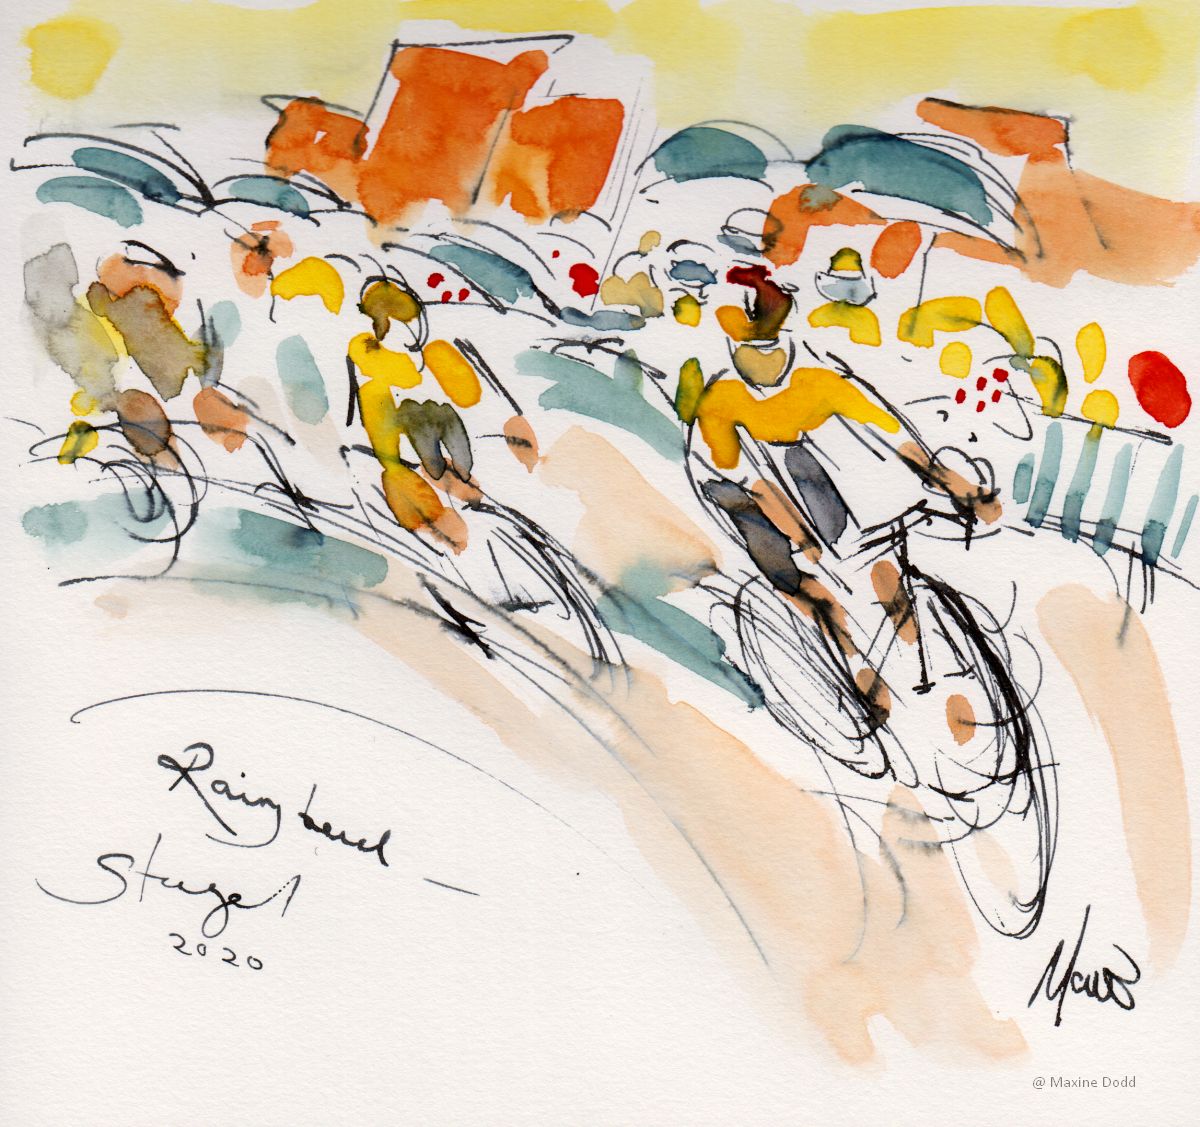 Jumbo-Visma team from Stage 1 TDF2020 on a rainy bend - watercolour pen and ink by Maxine Dodd